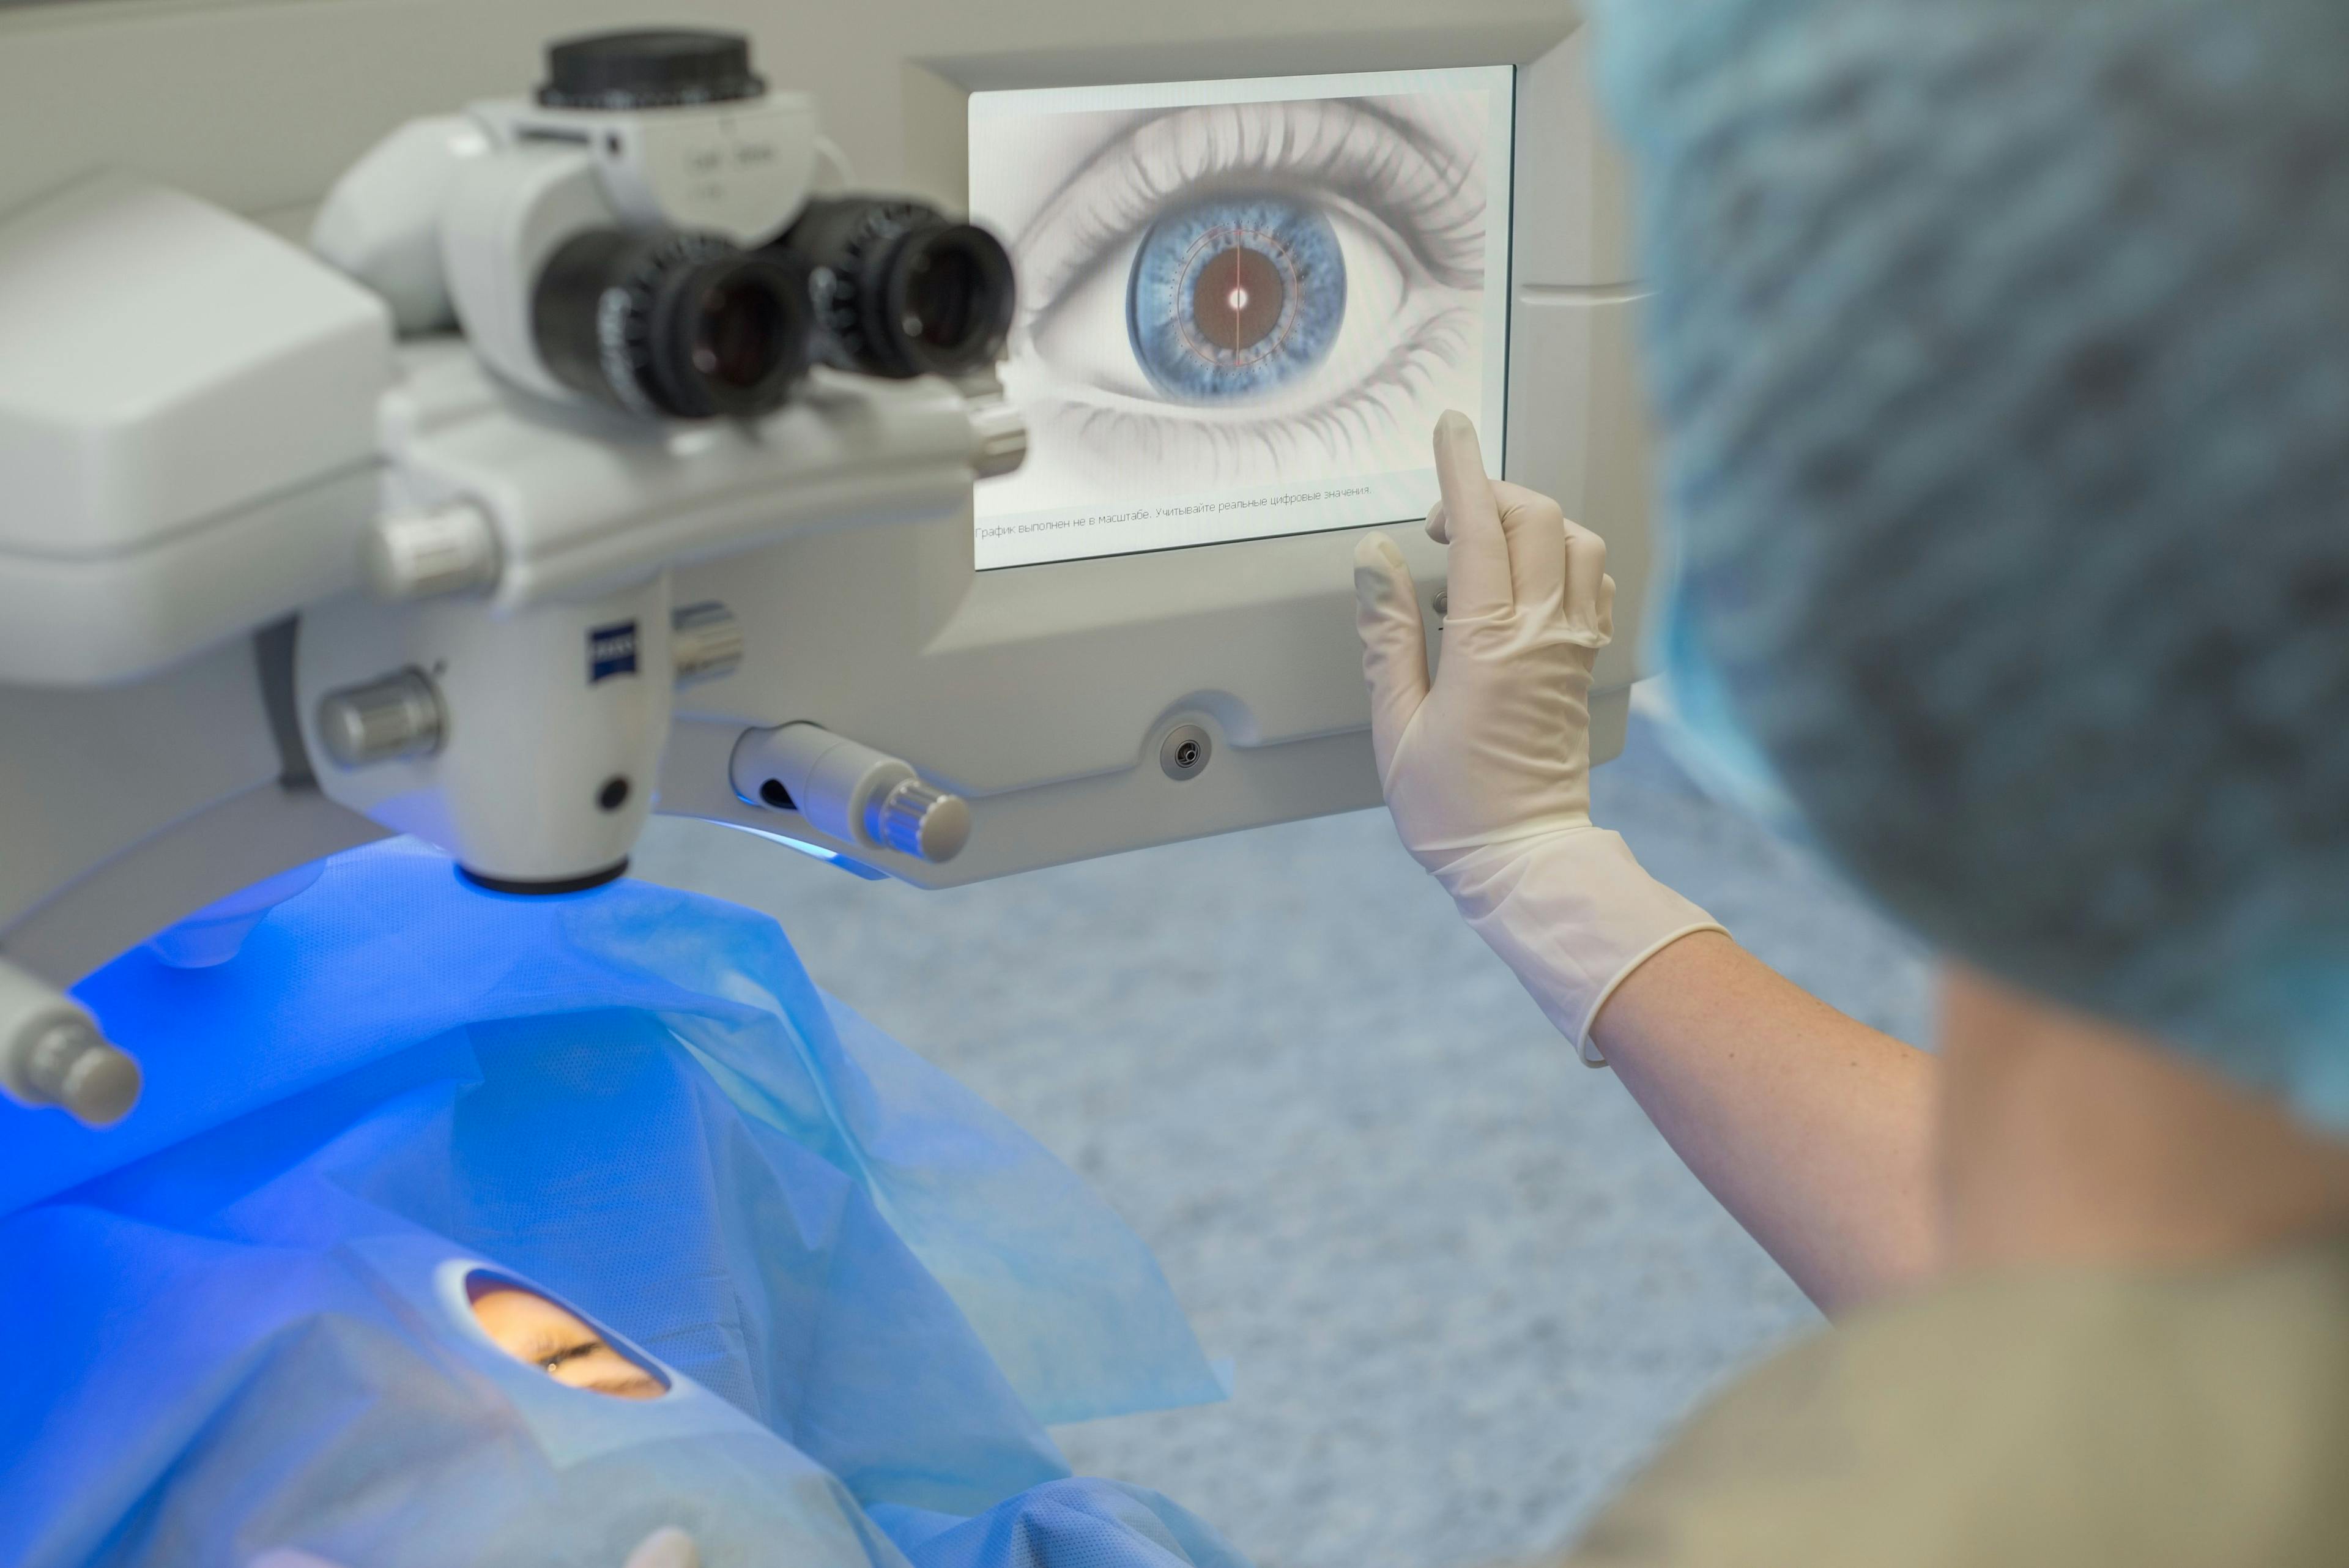 Ophthalmologist setting up monitor for use in laser surgery of eye